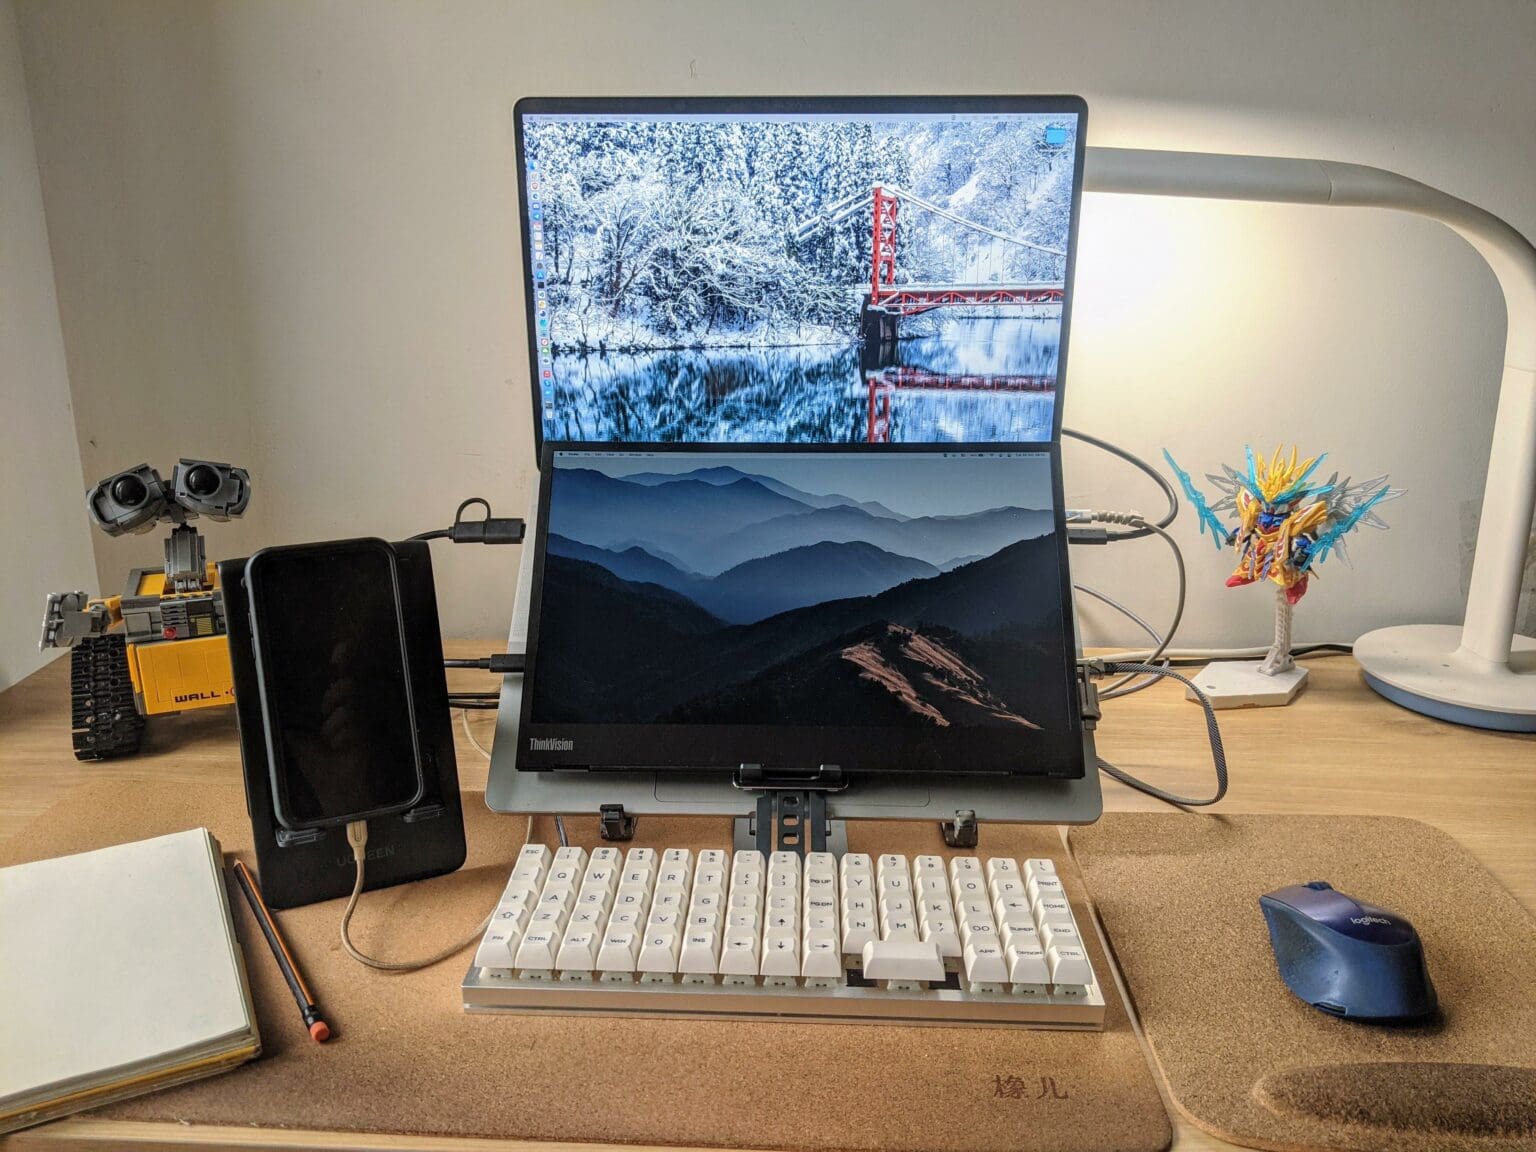 A portable monitor is mounted over the MacBook Pro's keyboard and an ortholinear-layout keyboard is the main input device.